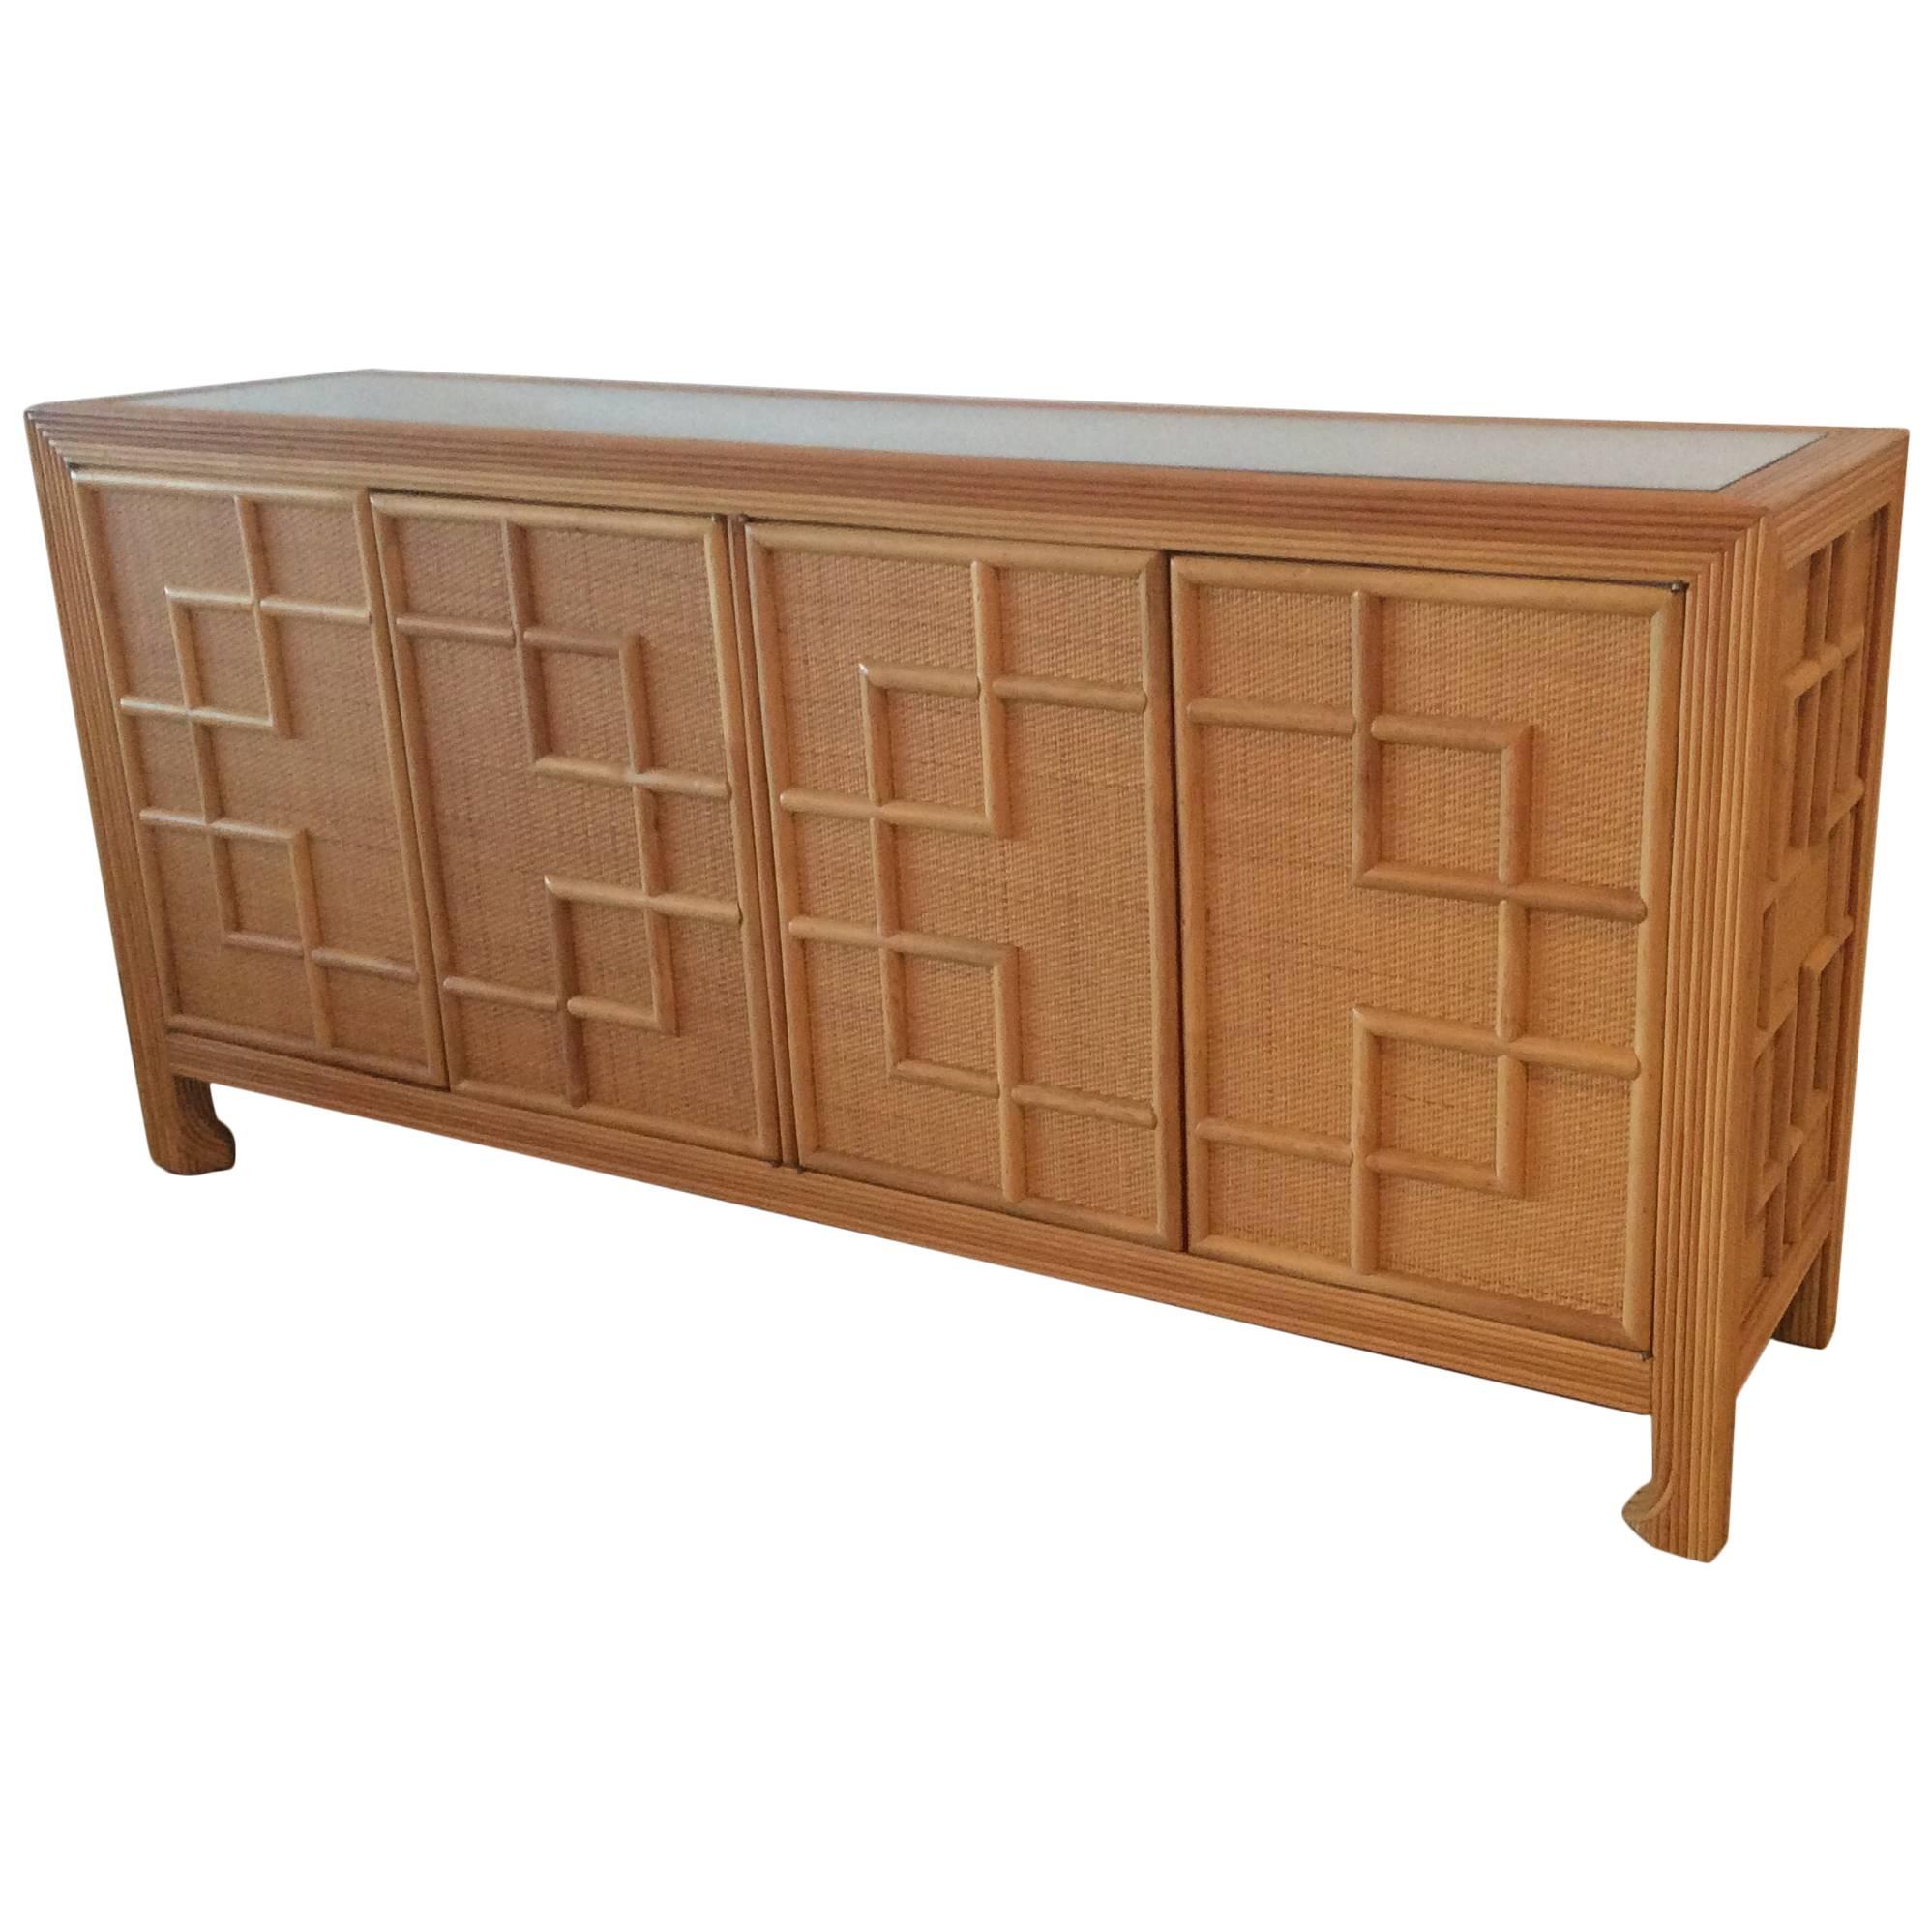 Pencil Reed Bamboo Rattan Wicker Credenza Vintage Buffet Sideboard Dresser